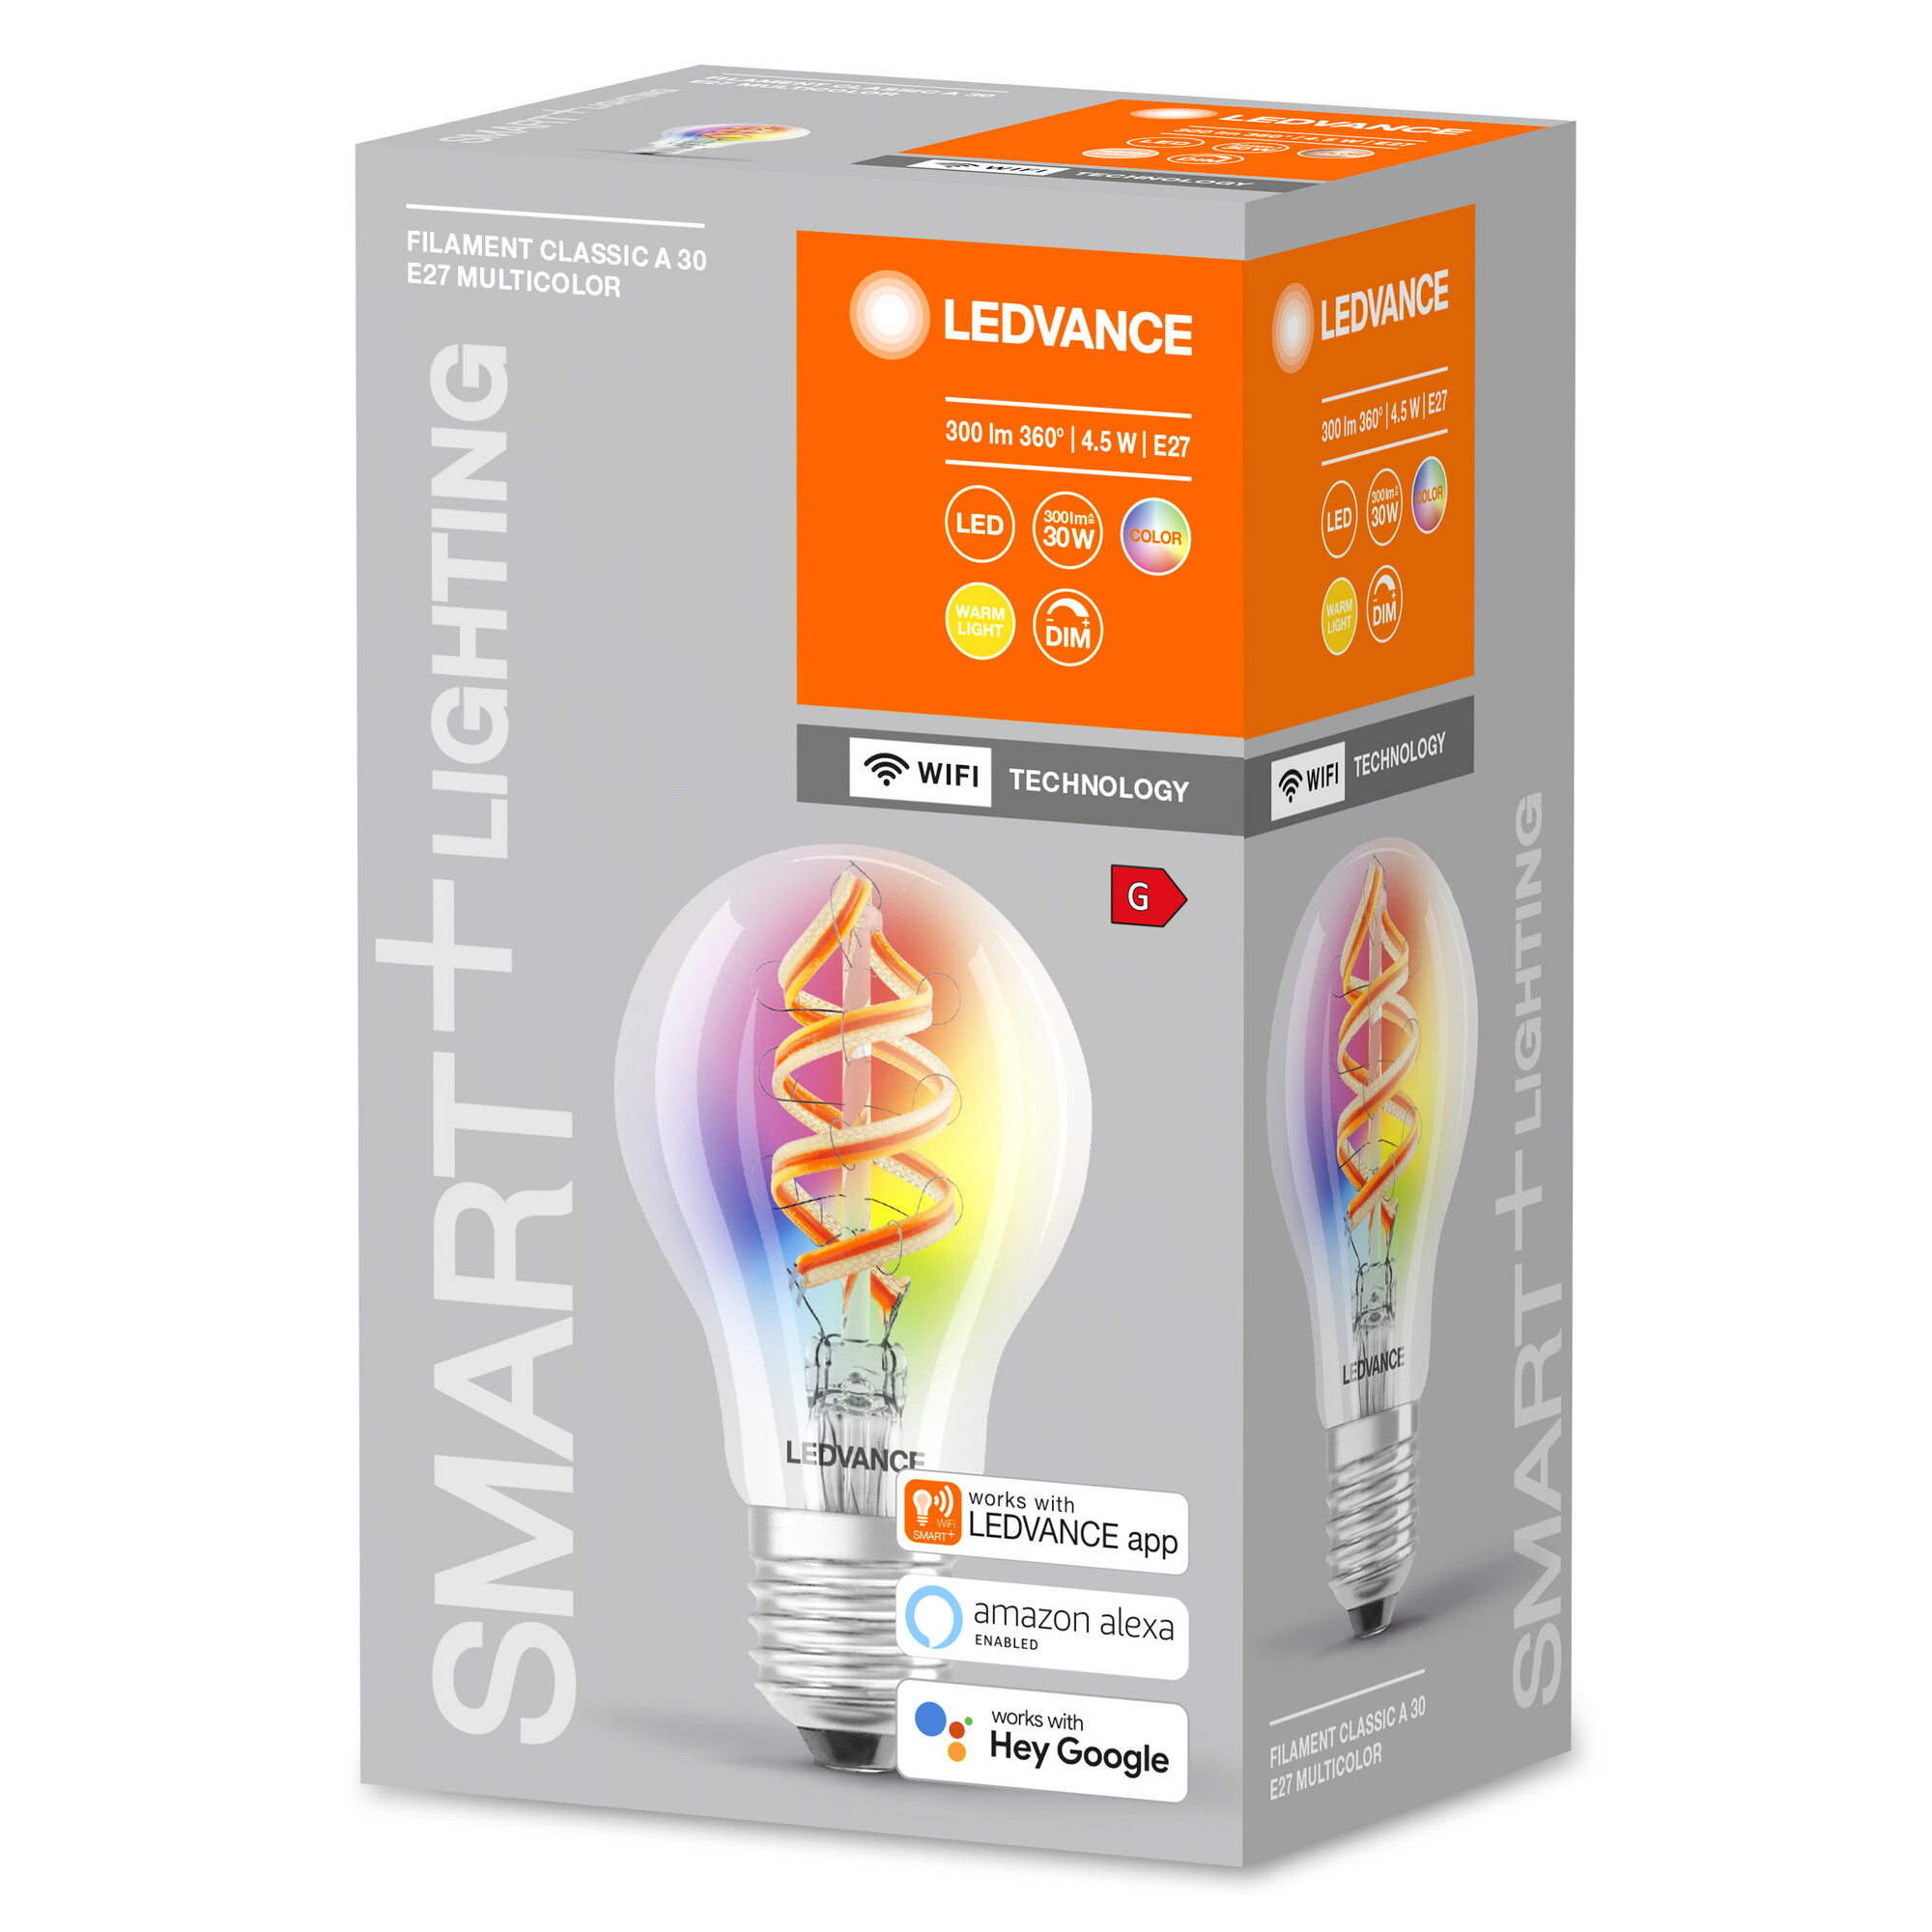 LED-Filament Lampe 'Smart+ WiFi CLA' RGBW 4,5 W E27 300 lm, dimmbar + product picture